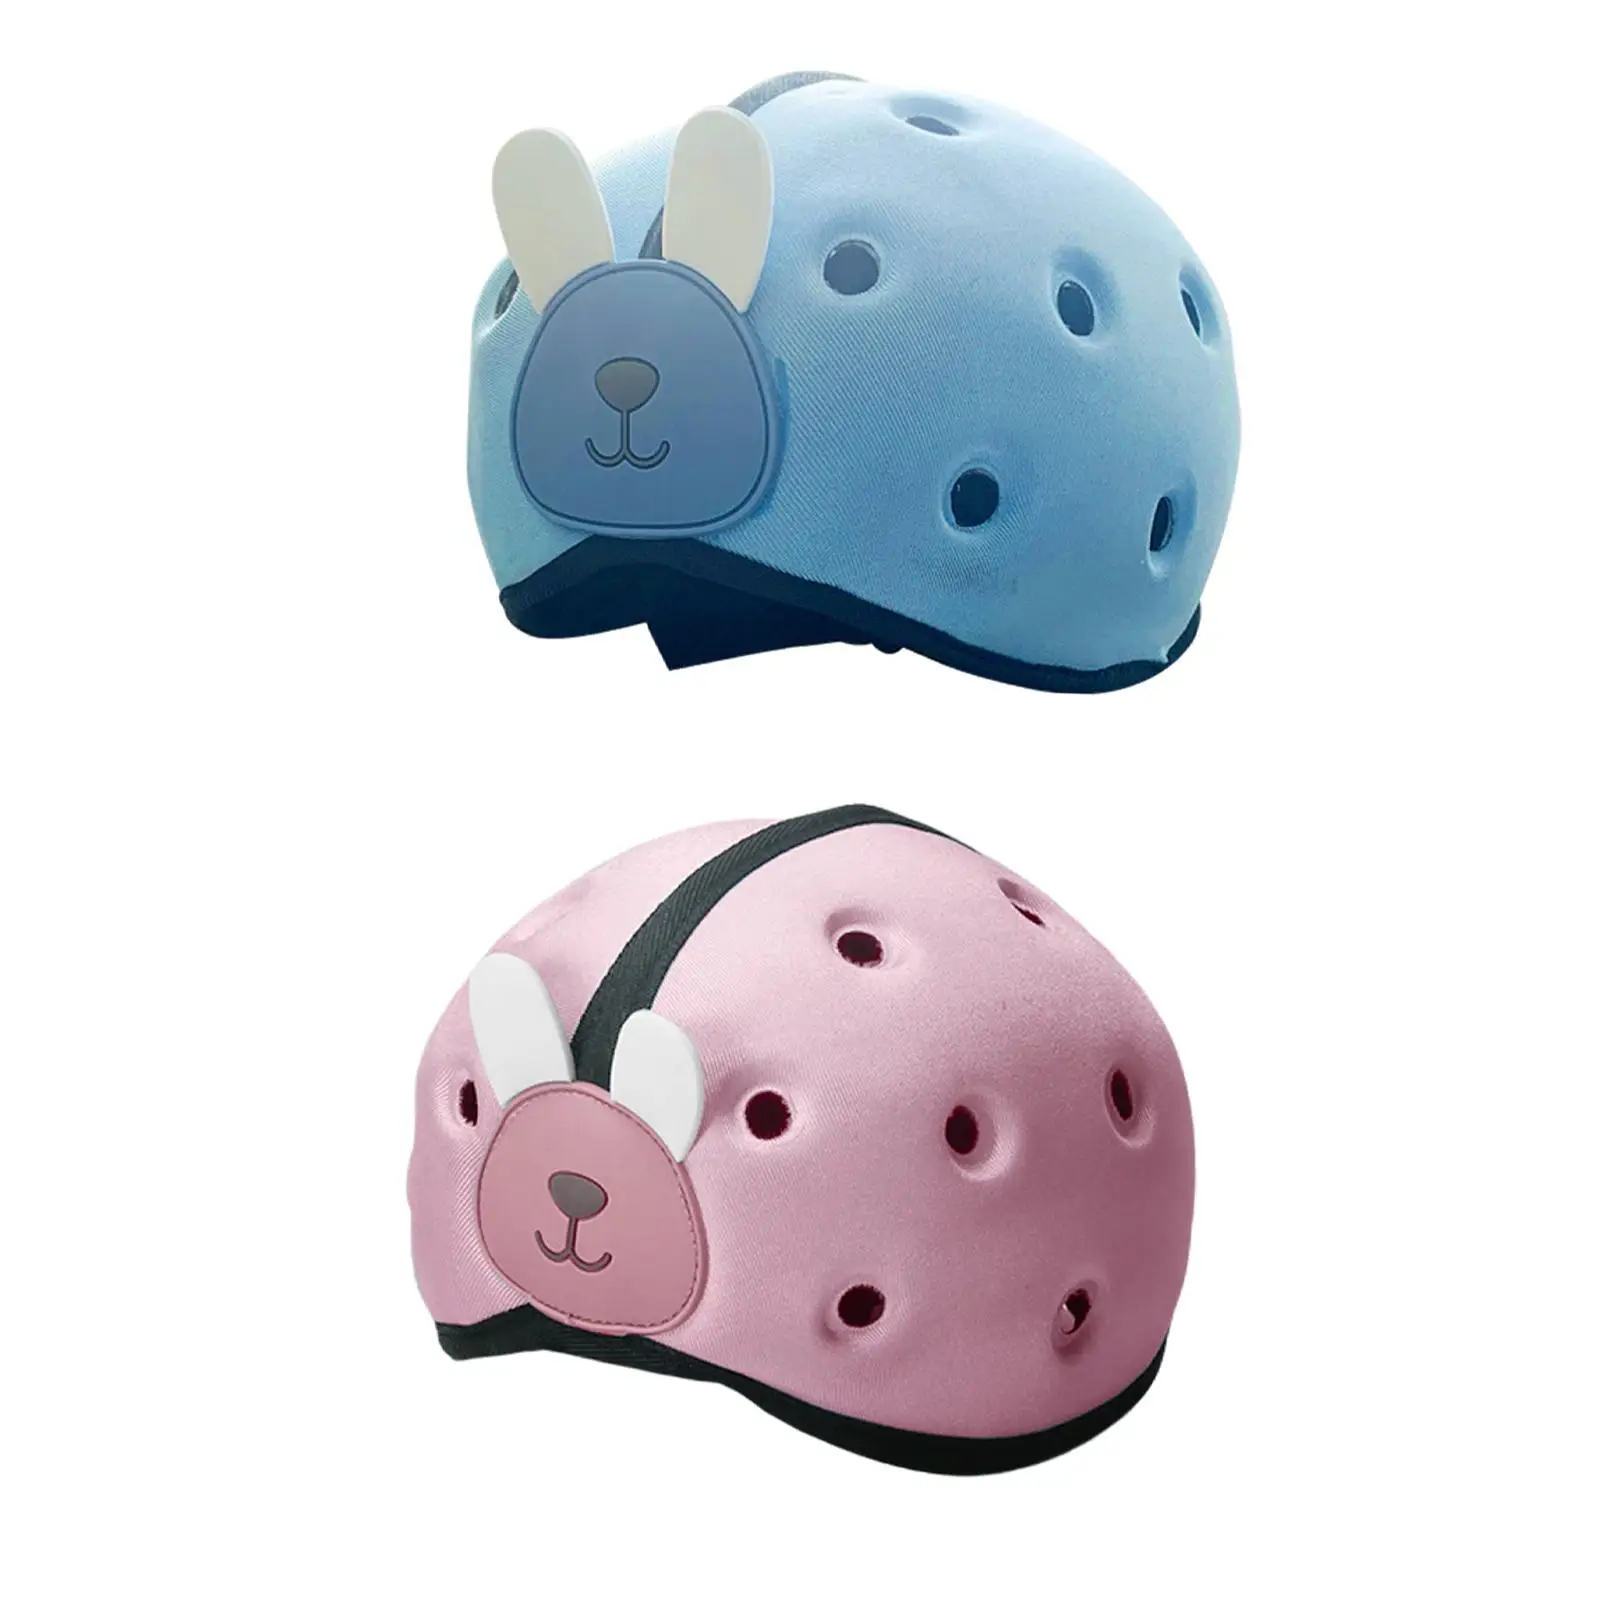  , Children headprotect for Toddler Children, Kids Crawling